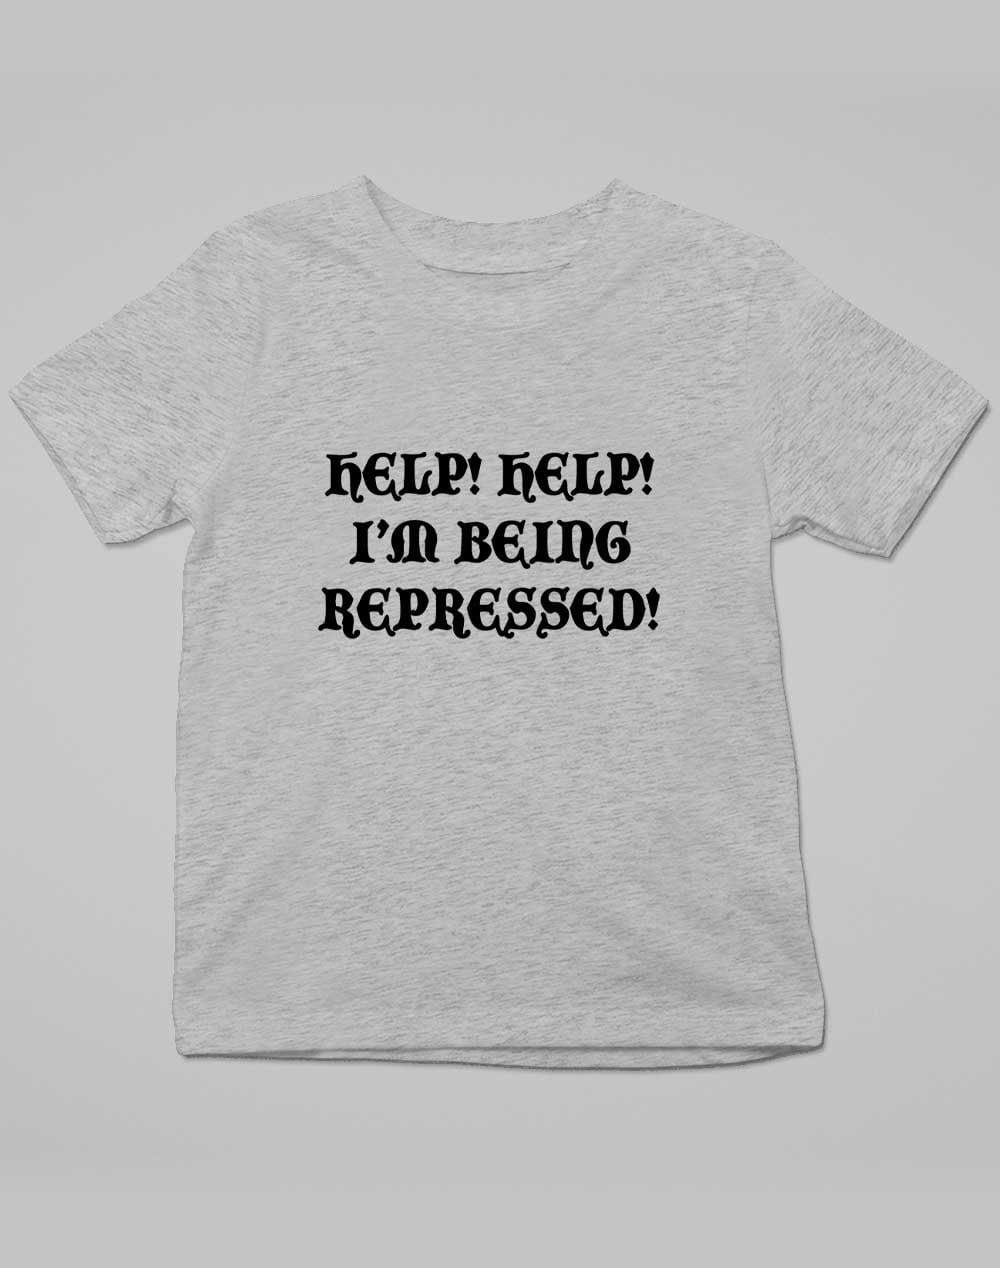 Help I'm Being Repressed Kids T-Shirt  - Off World Tees